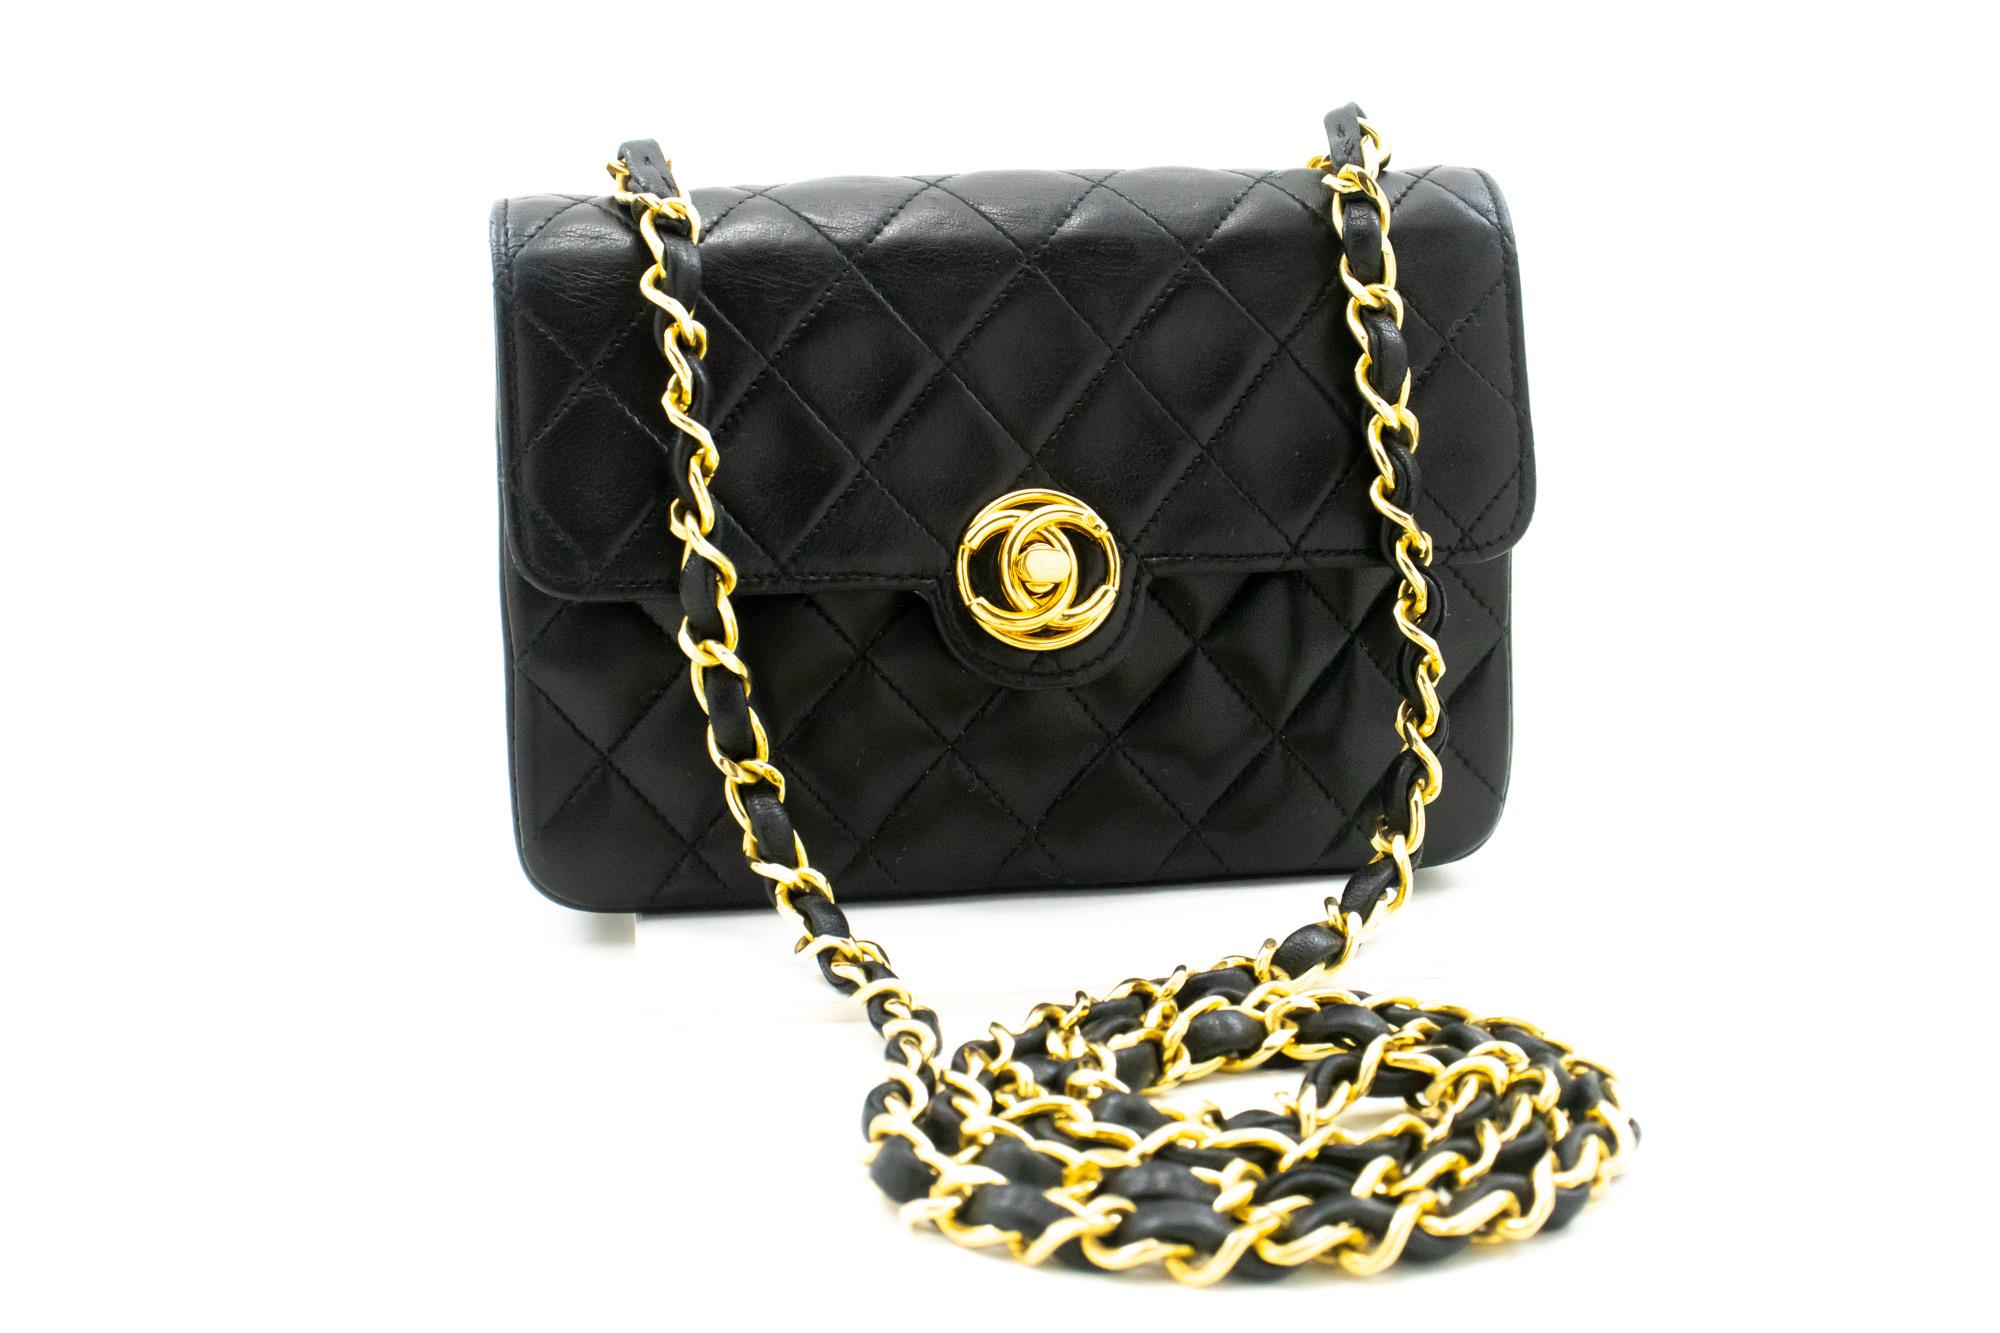 An authentic CHANEL Mini Small Chain Shoulder Bag Crossbody Black Quilted Flap. The color is Black. The outside material is Leather. The pattern is Solid. This item is Vintage / Classic. The year of manufacture would be 1989-1991.
Conditions &